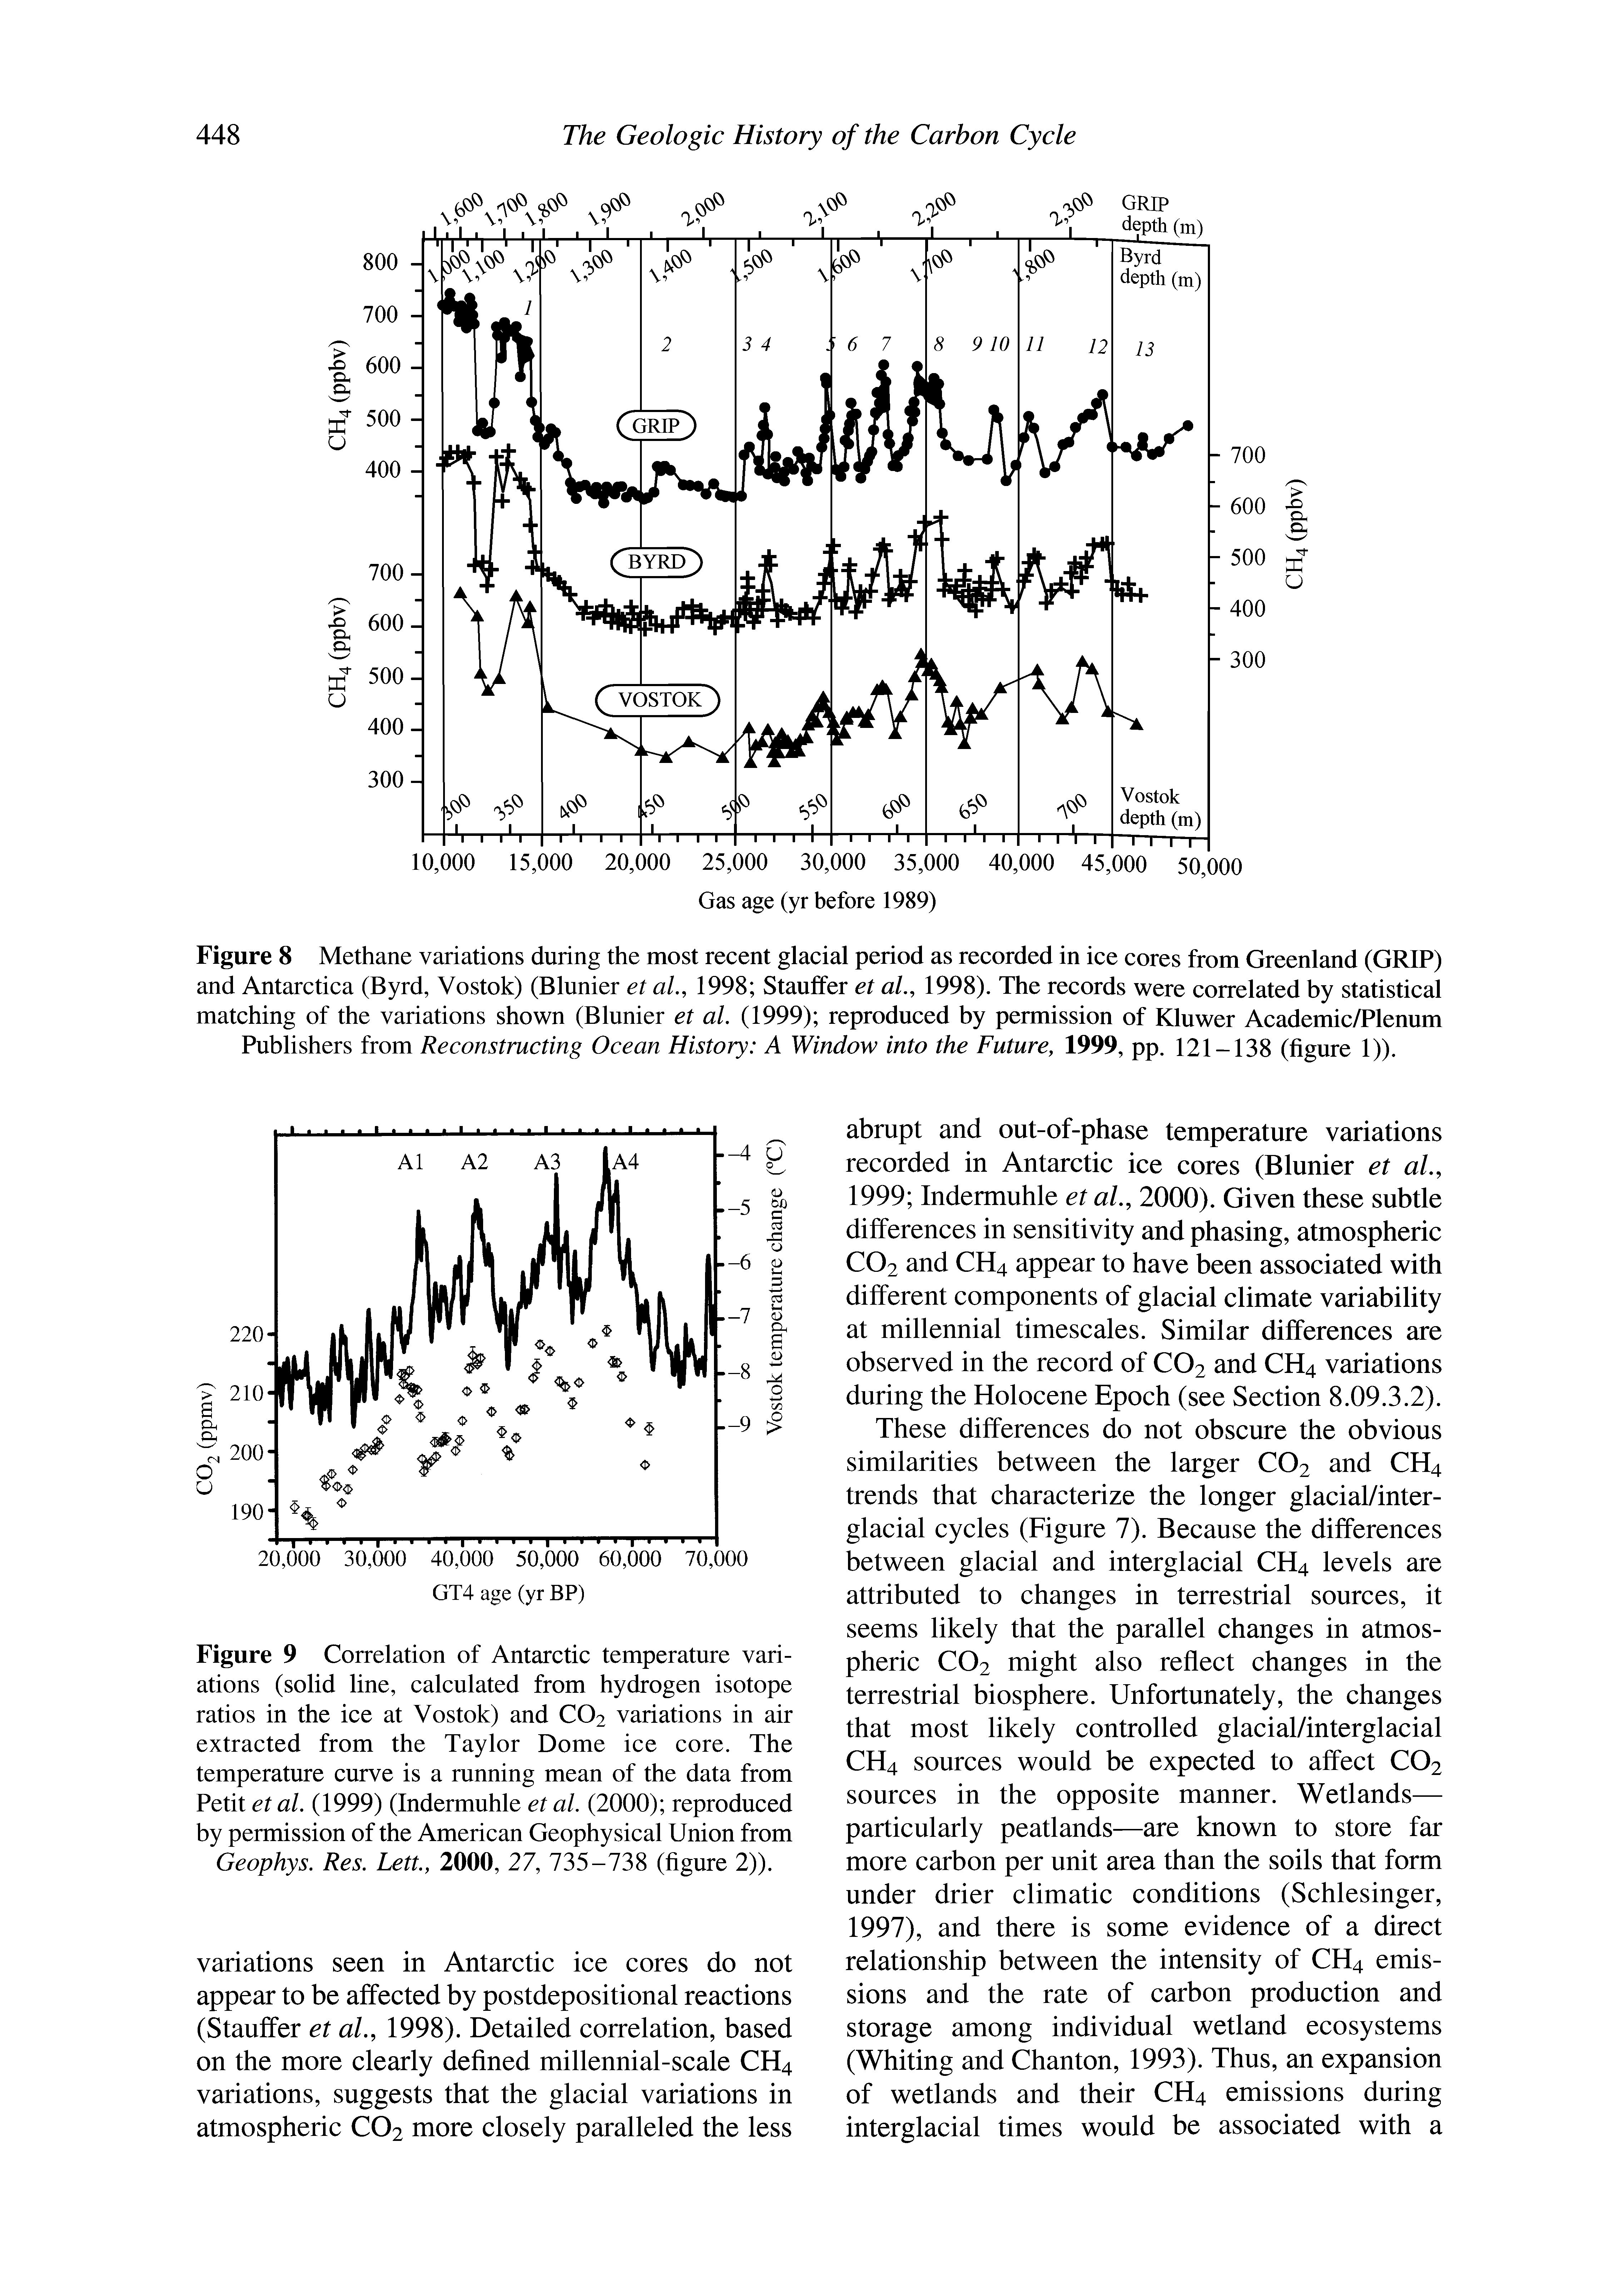 Figure 8 Methane variations during the most reeent glaeial period as recorded in ice cores from Greenland (GRIP) and Antarctica (Byrd, Vostok) (Blunier et al, 1998 Stauffer et aL, 1998). The records were correlated by statistical matching of the variations shown (Blunier et al. (1999) reproduced by permission of Kluwer Academic/Plenum Publishers from Reconstructing Ocean History A Window into the Future, 1999, pp. 121-138 (figure 1)).